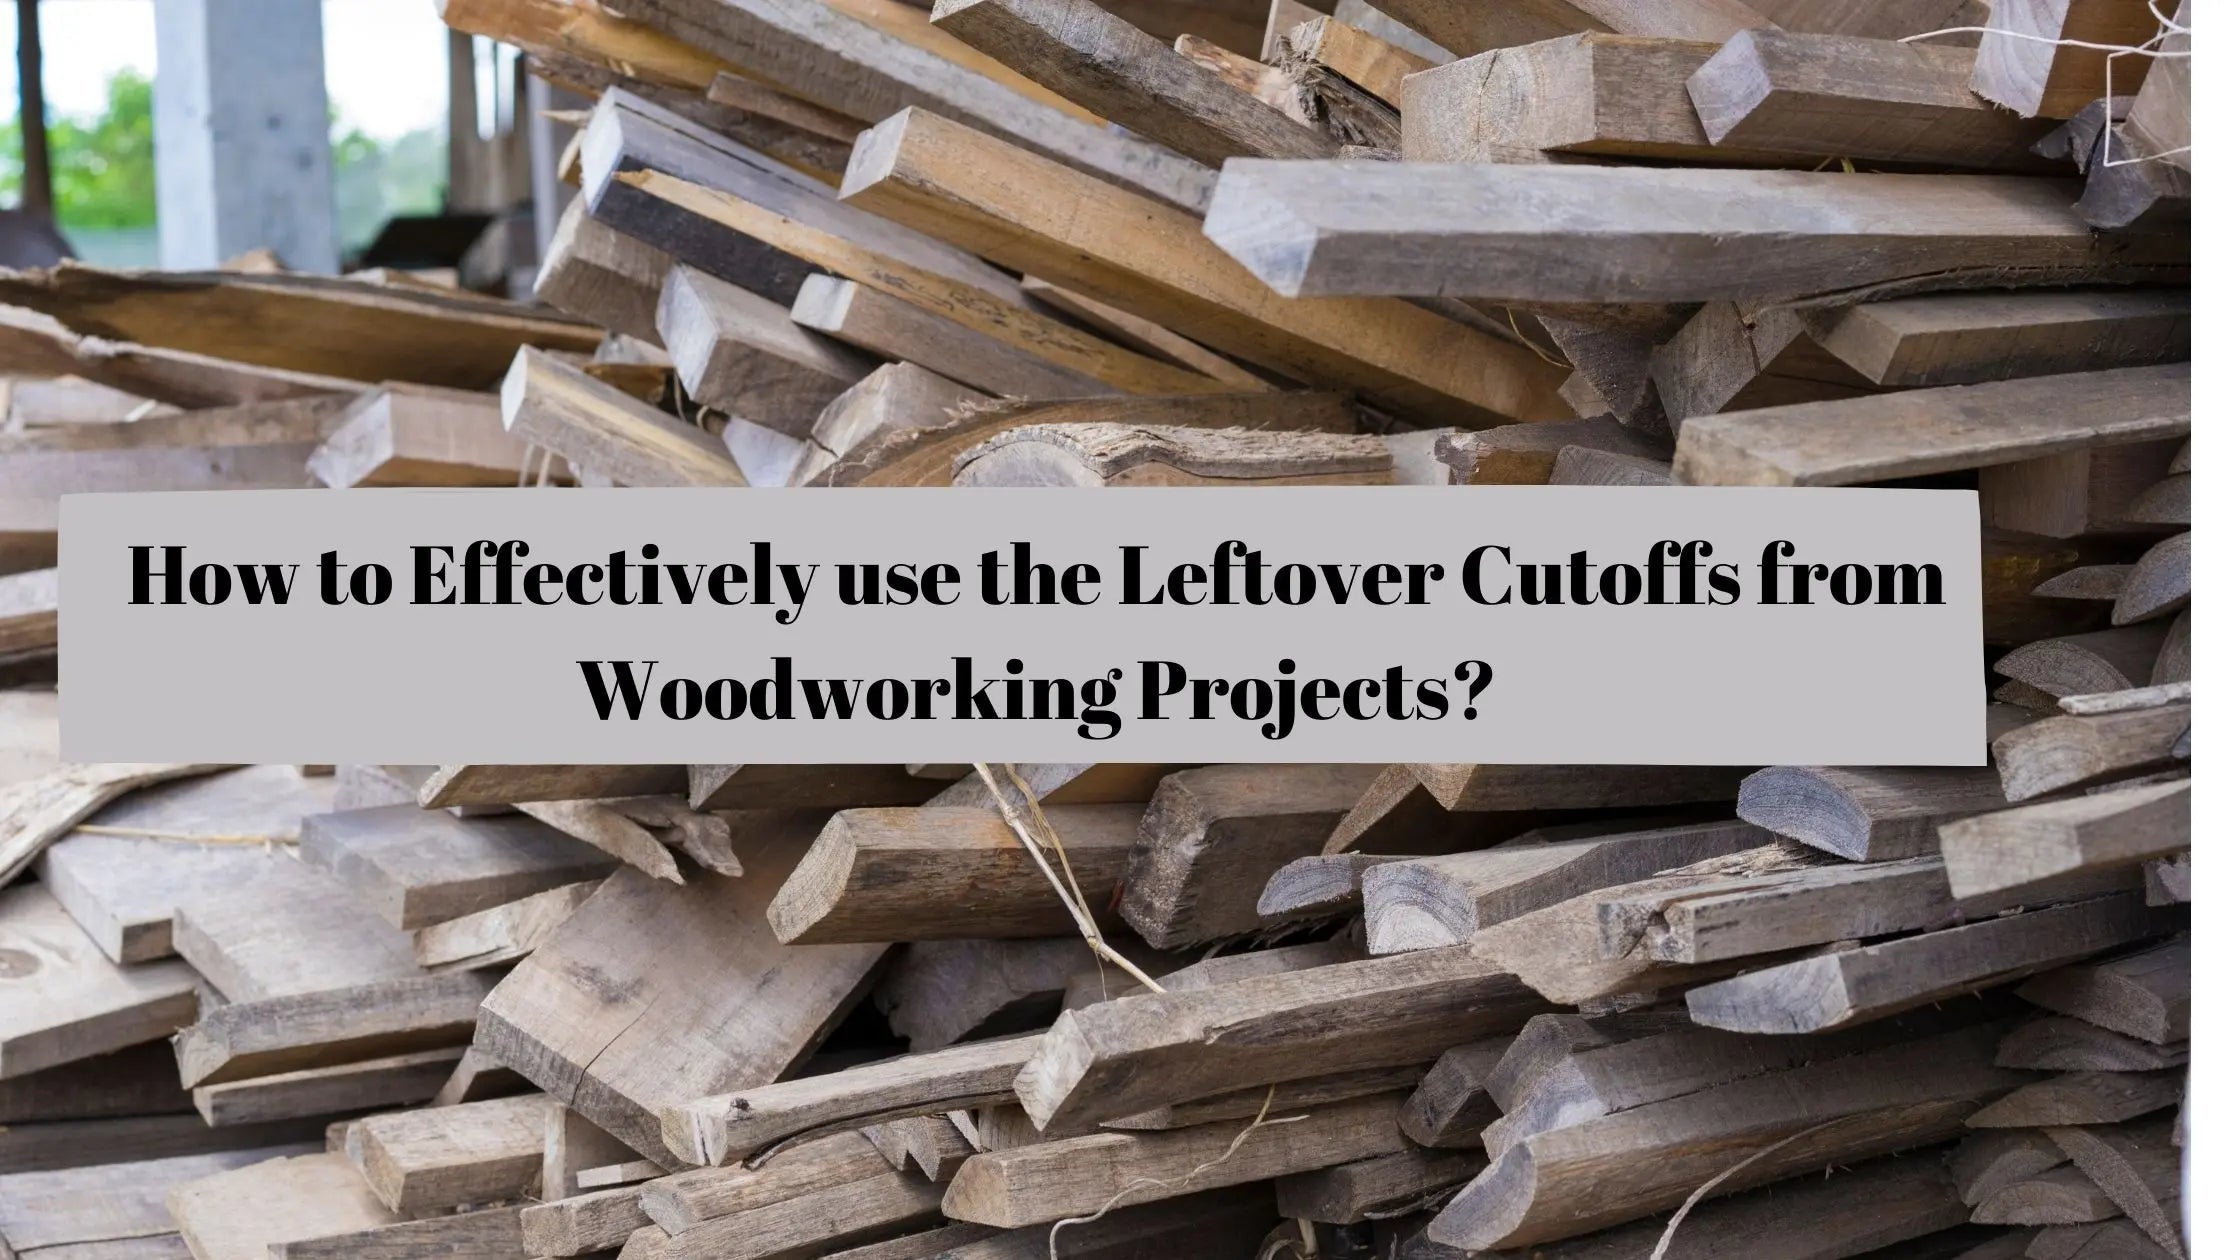 How to effectively use the leftover cutoffs from woodworking projects?